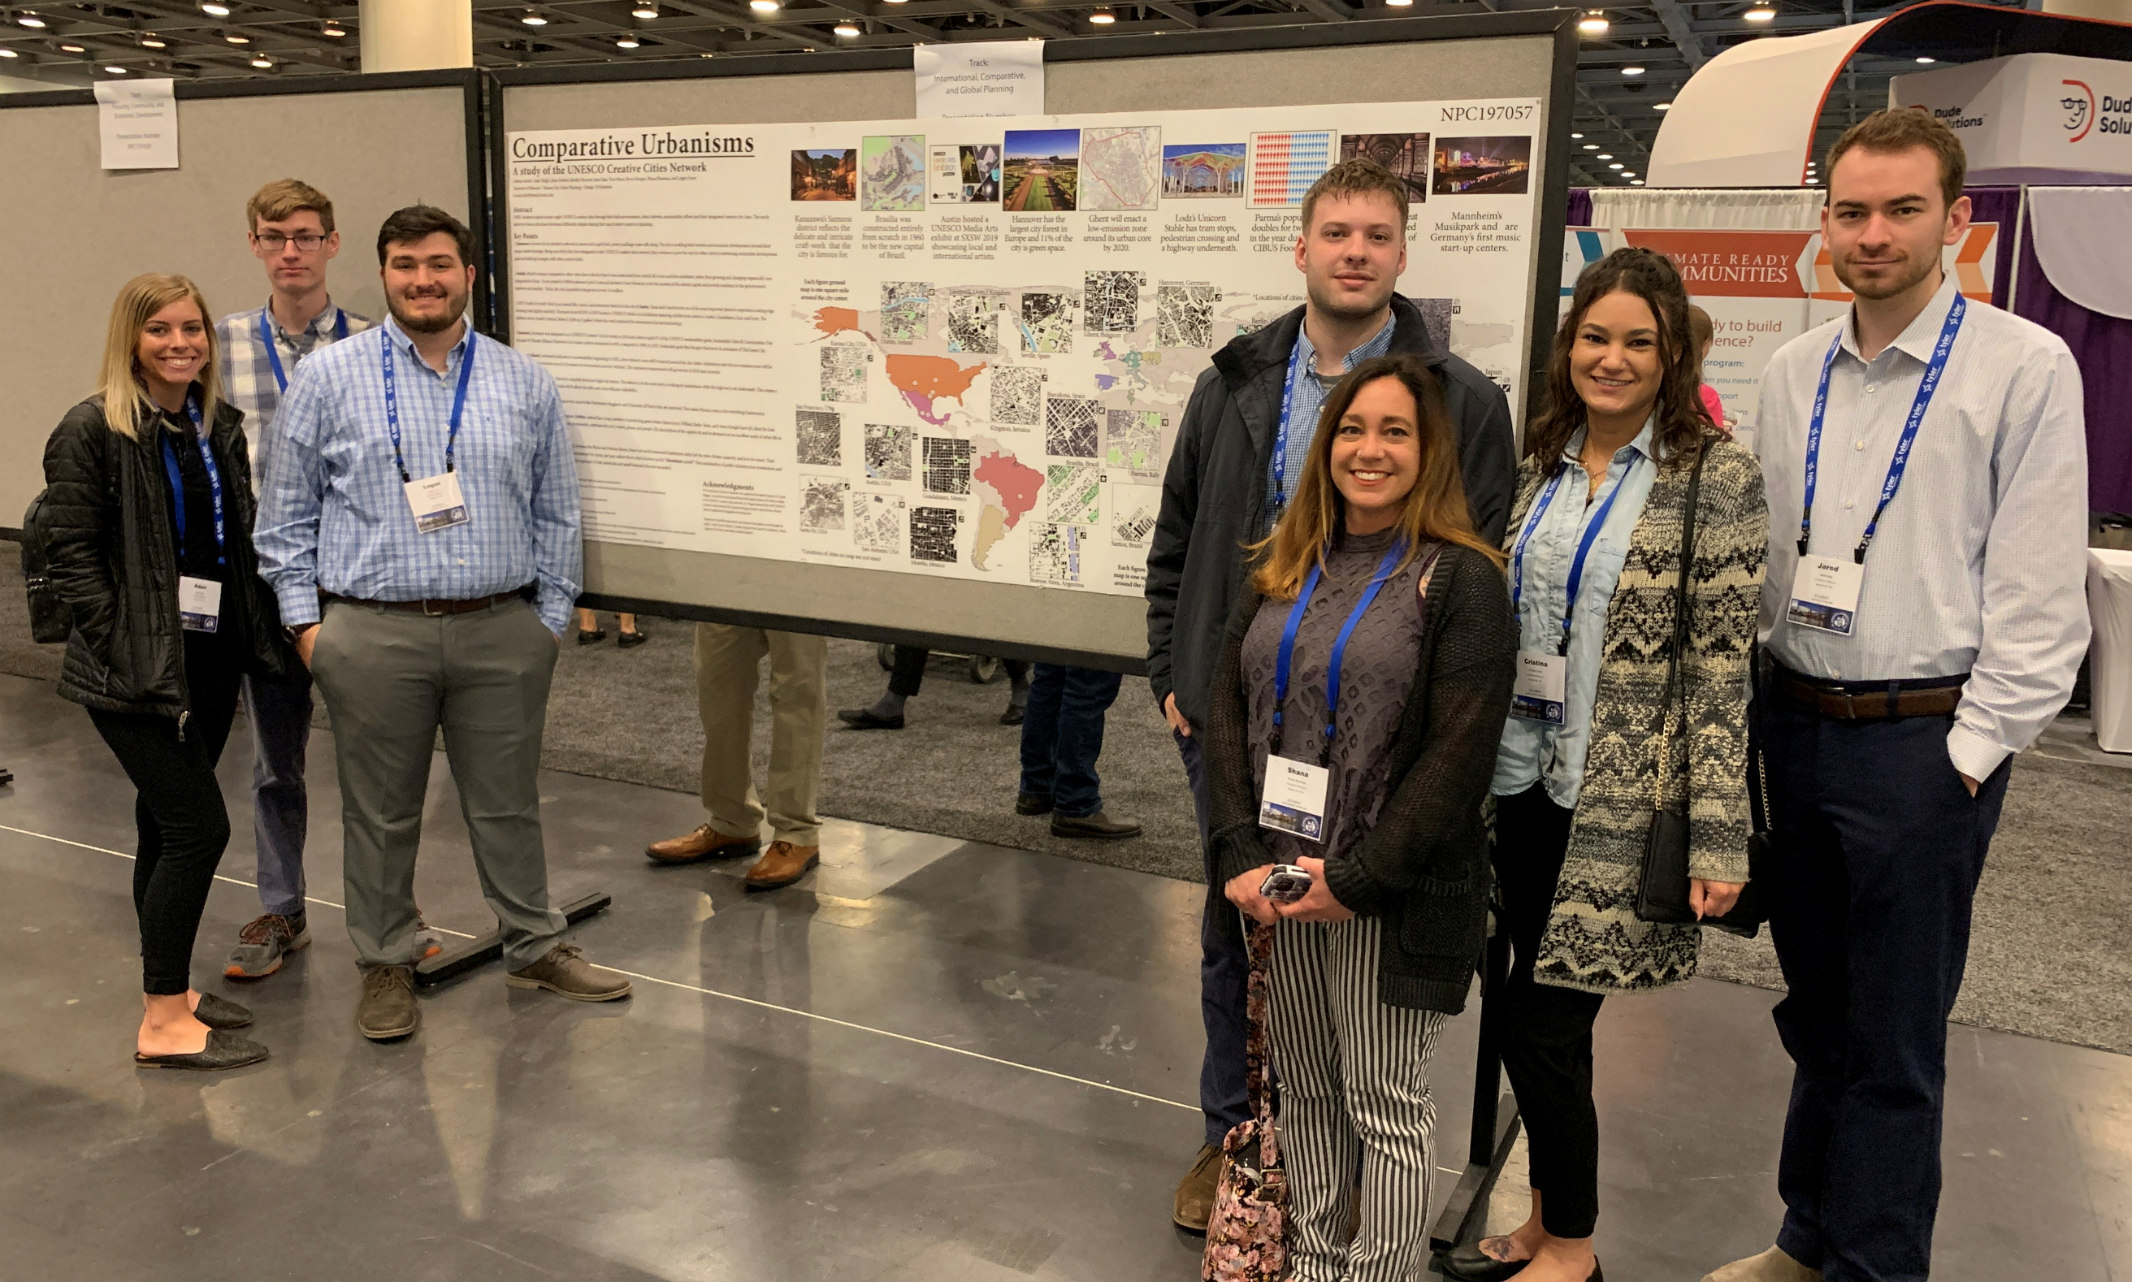 UMKC AUPD students took top honors for a research poster